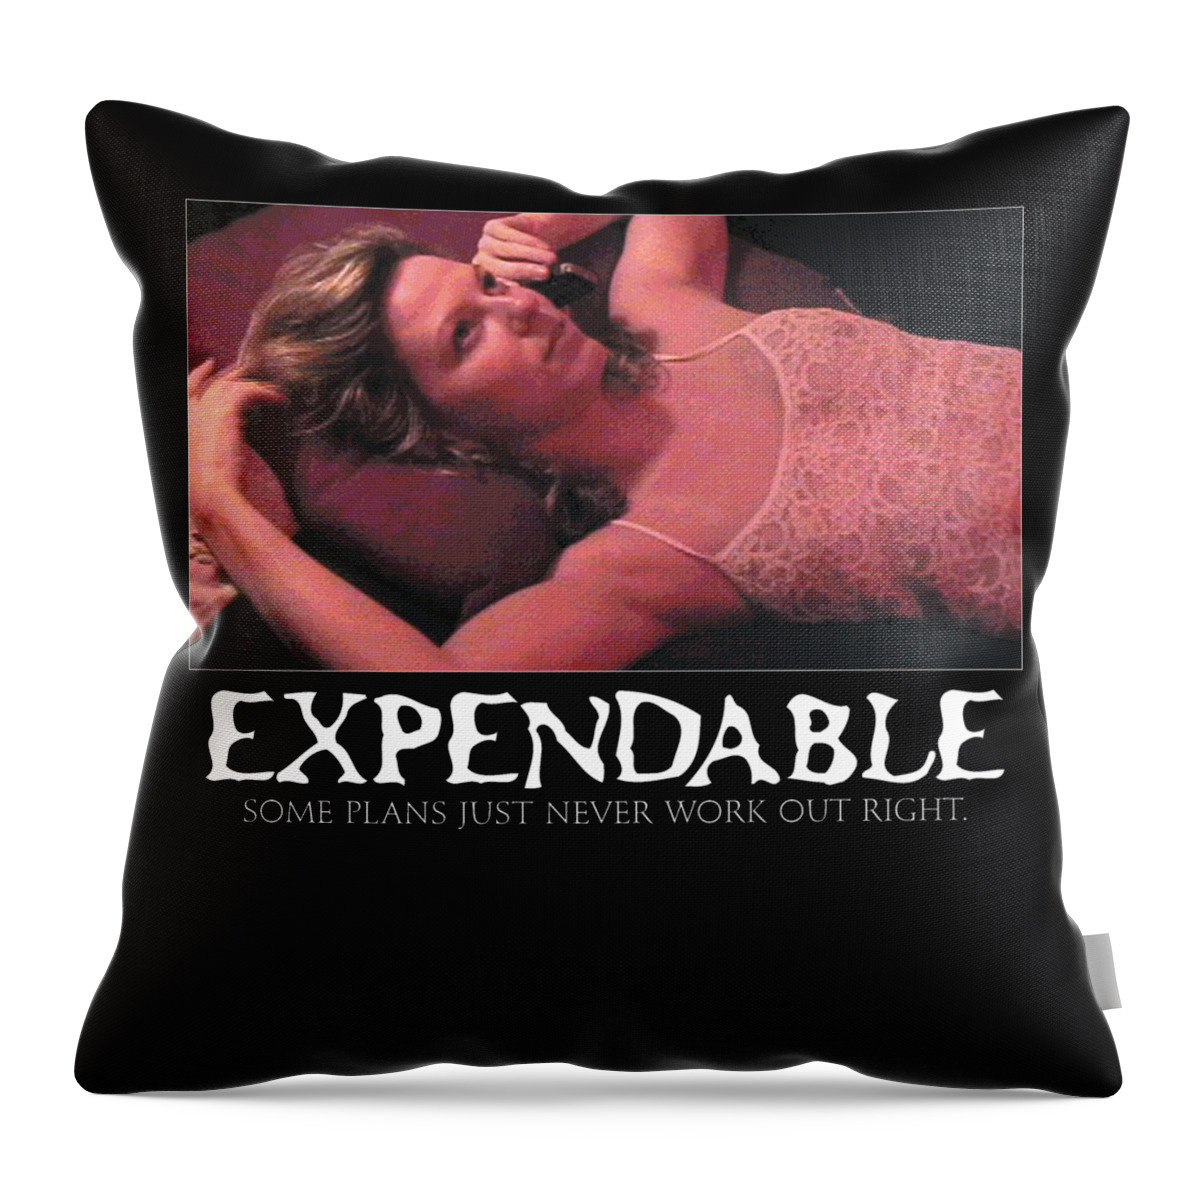 Movie Throw Pillow featuring the digital art Expendable 4 by Mark Baranowski